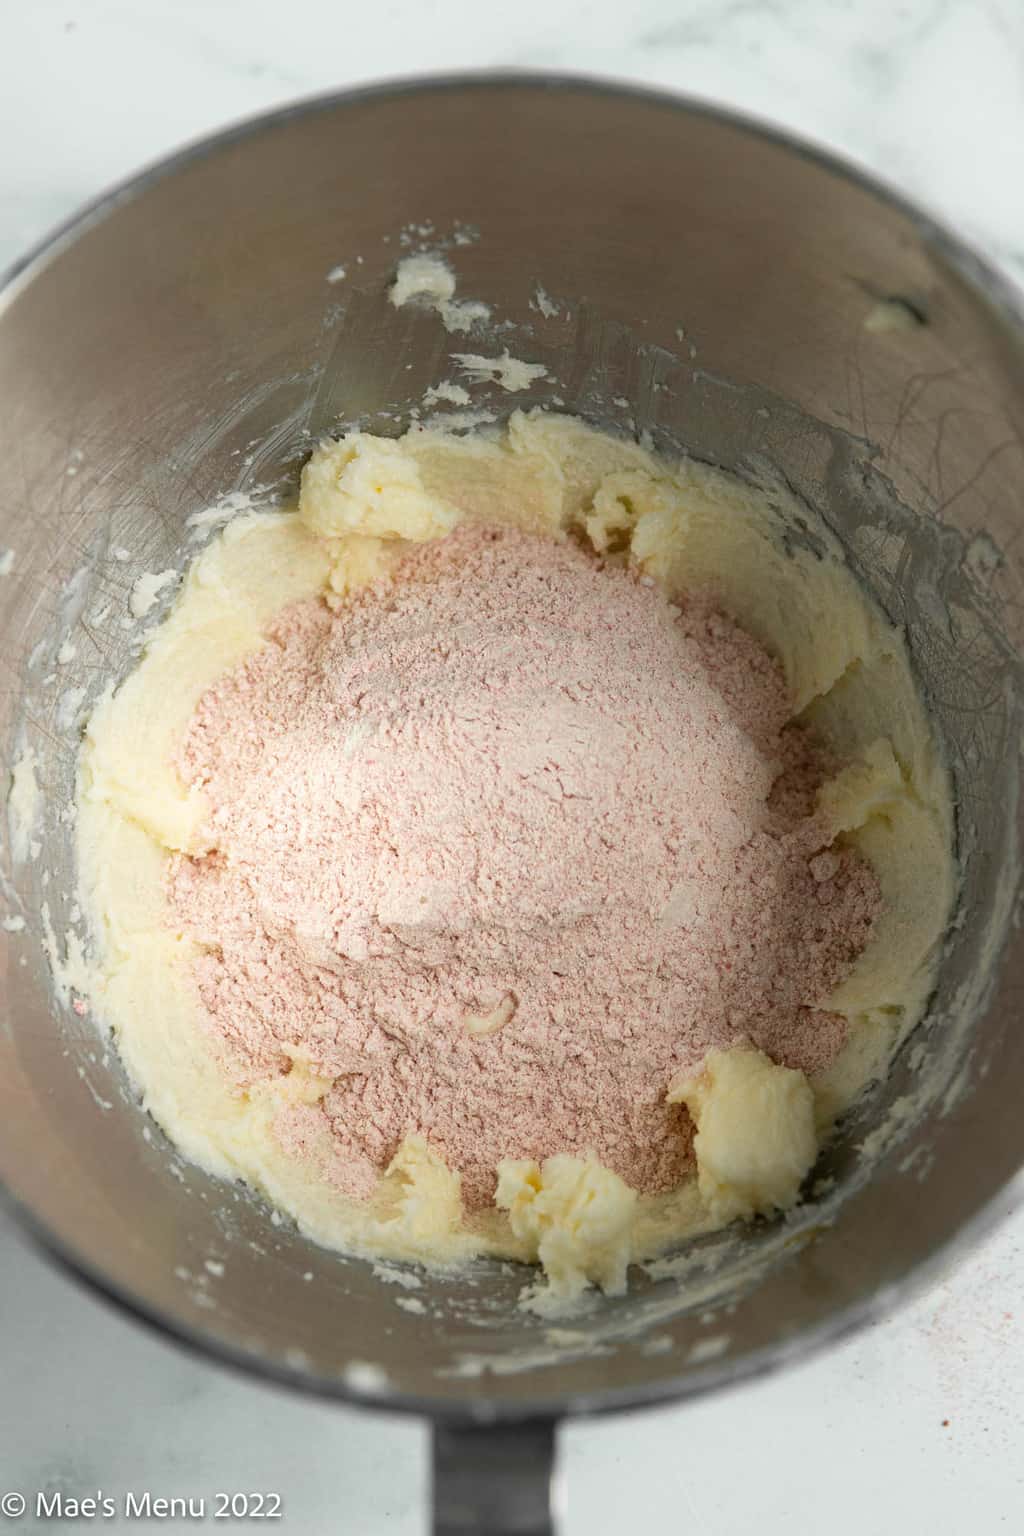 Creamed butter and strawberry flour mix in a mixing bowl.